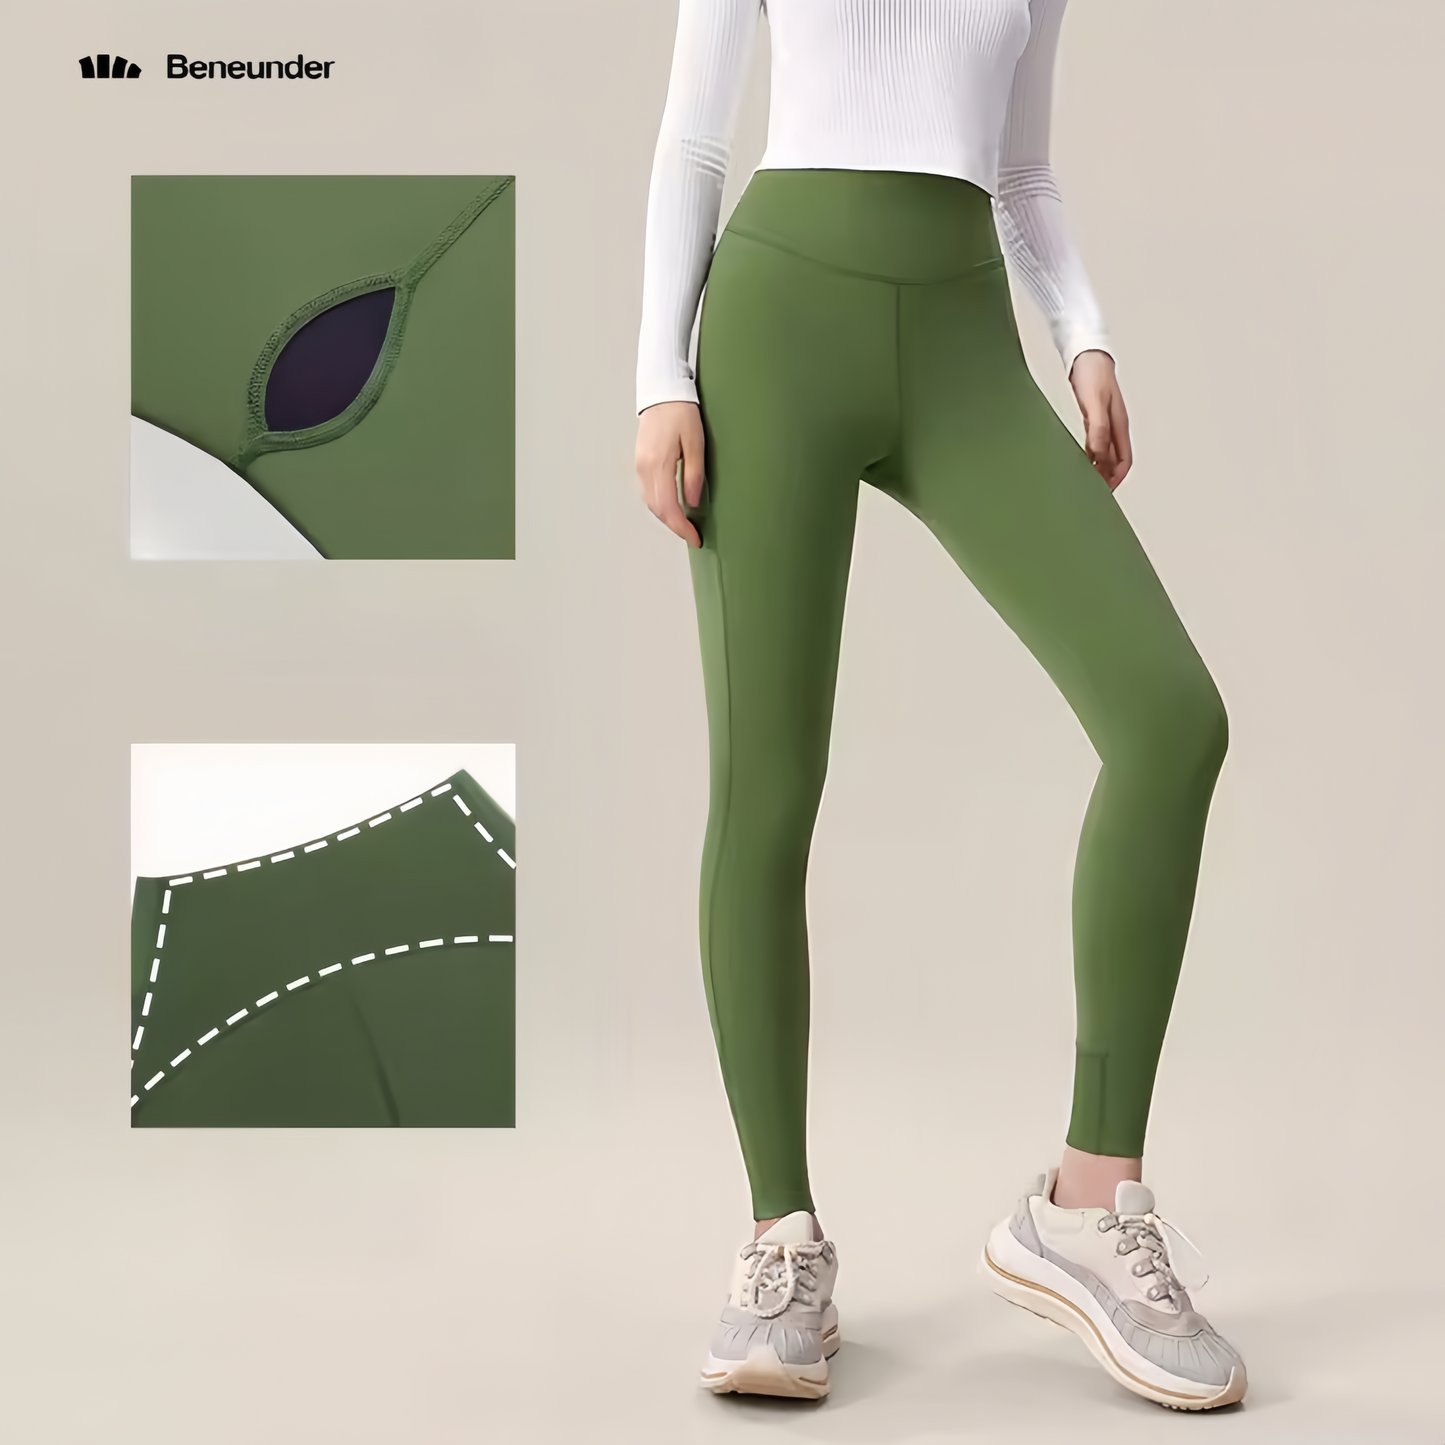 BENEUNDER Leggings for Women Gym Workout Lounge High Waisted Shaping Bottoms uttery Soft Yoga Pants